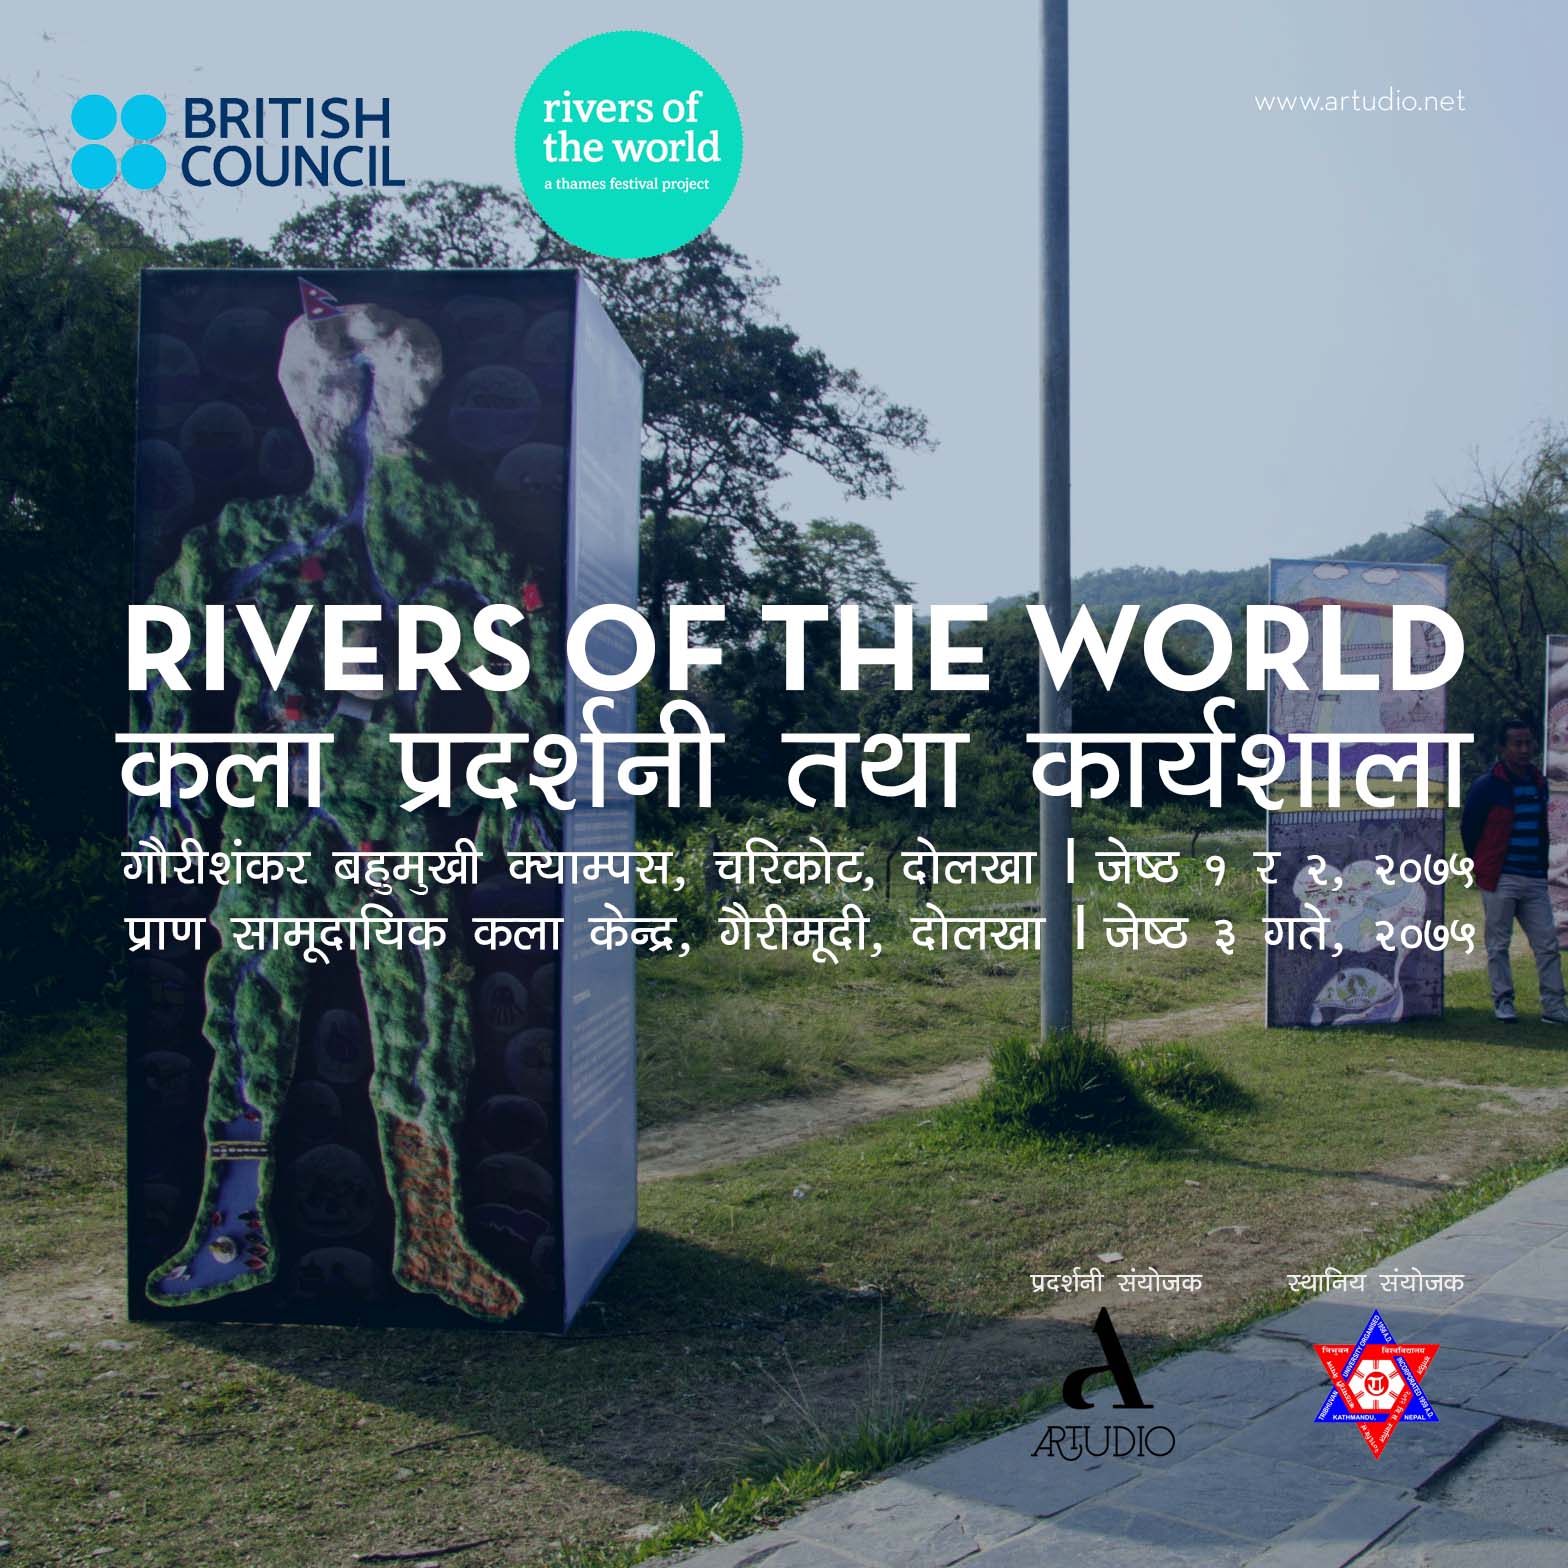 RIVERS OF THE WORLD ART EXHIBITION TRAVELLING TO DOLAKHA post thumbnail image